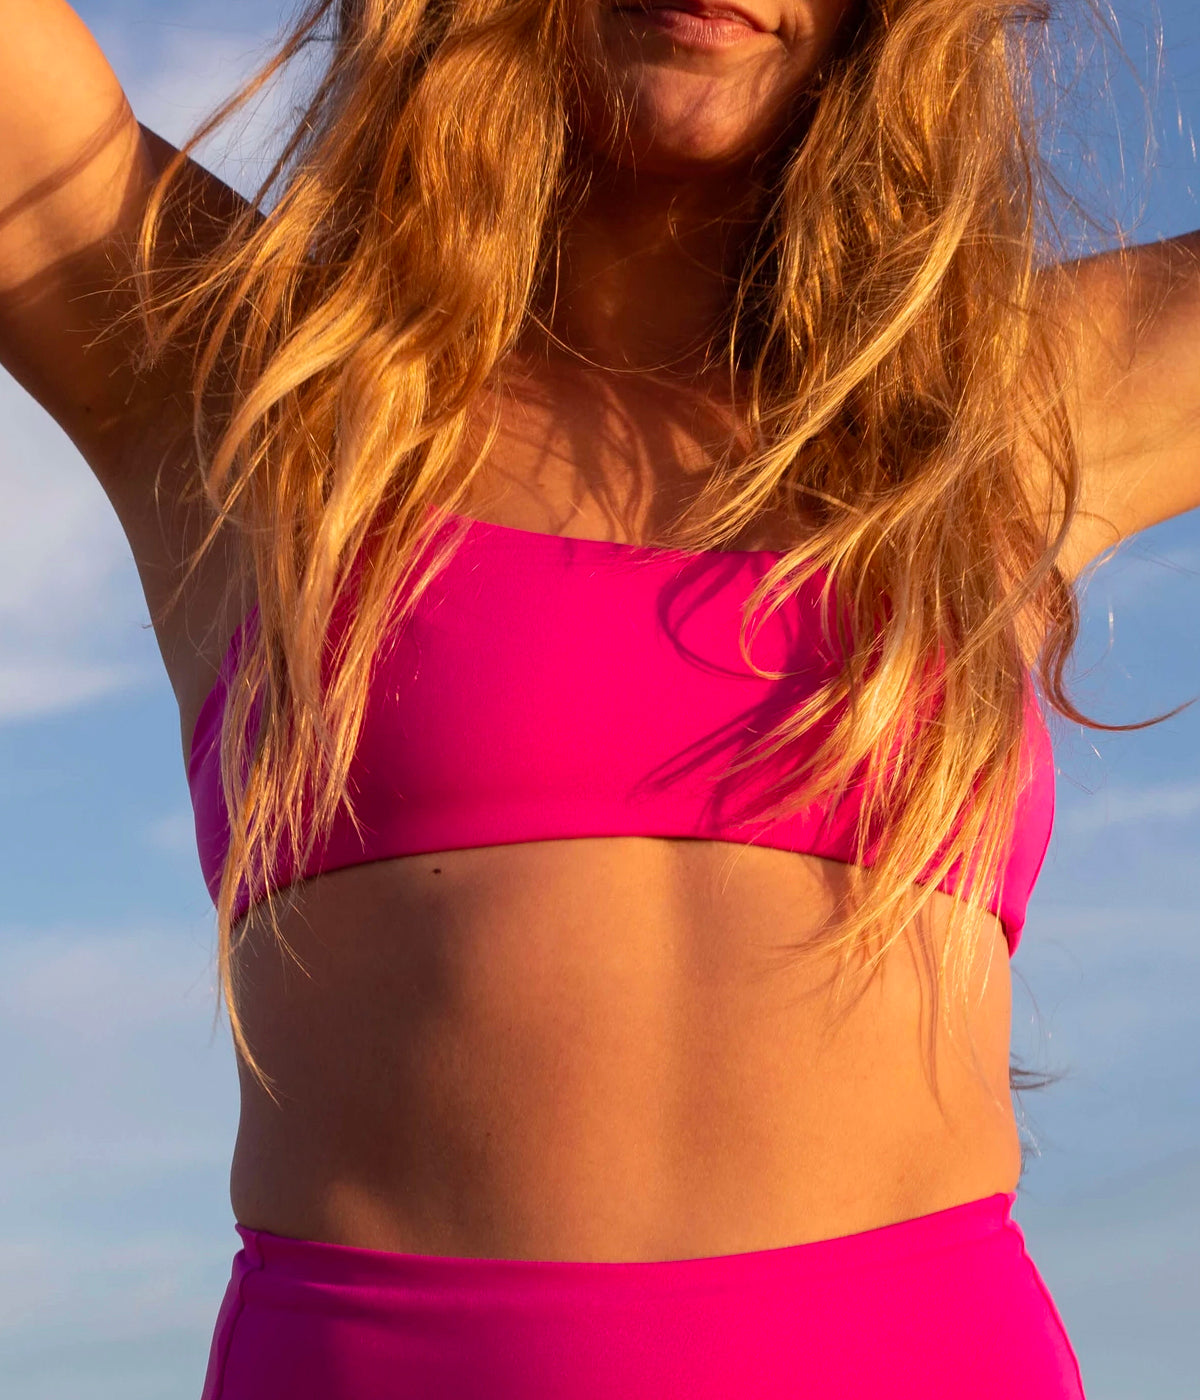 Go from the water to the poolside or beach in the Pool Days Top in Hot Pink. A medium coverage bright pink bikini top with a scoop neckline, Double lined for a flattering fit. 